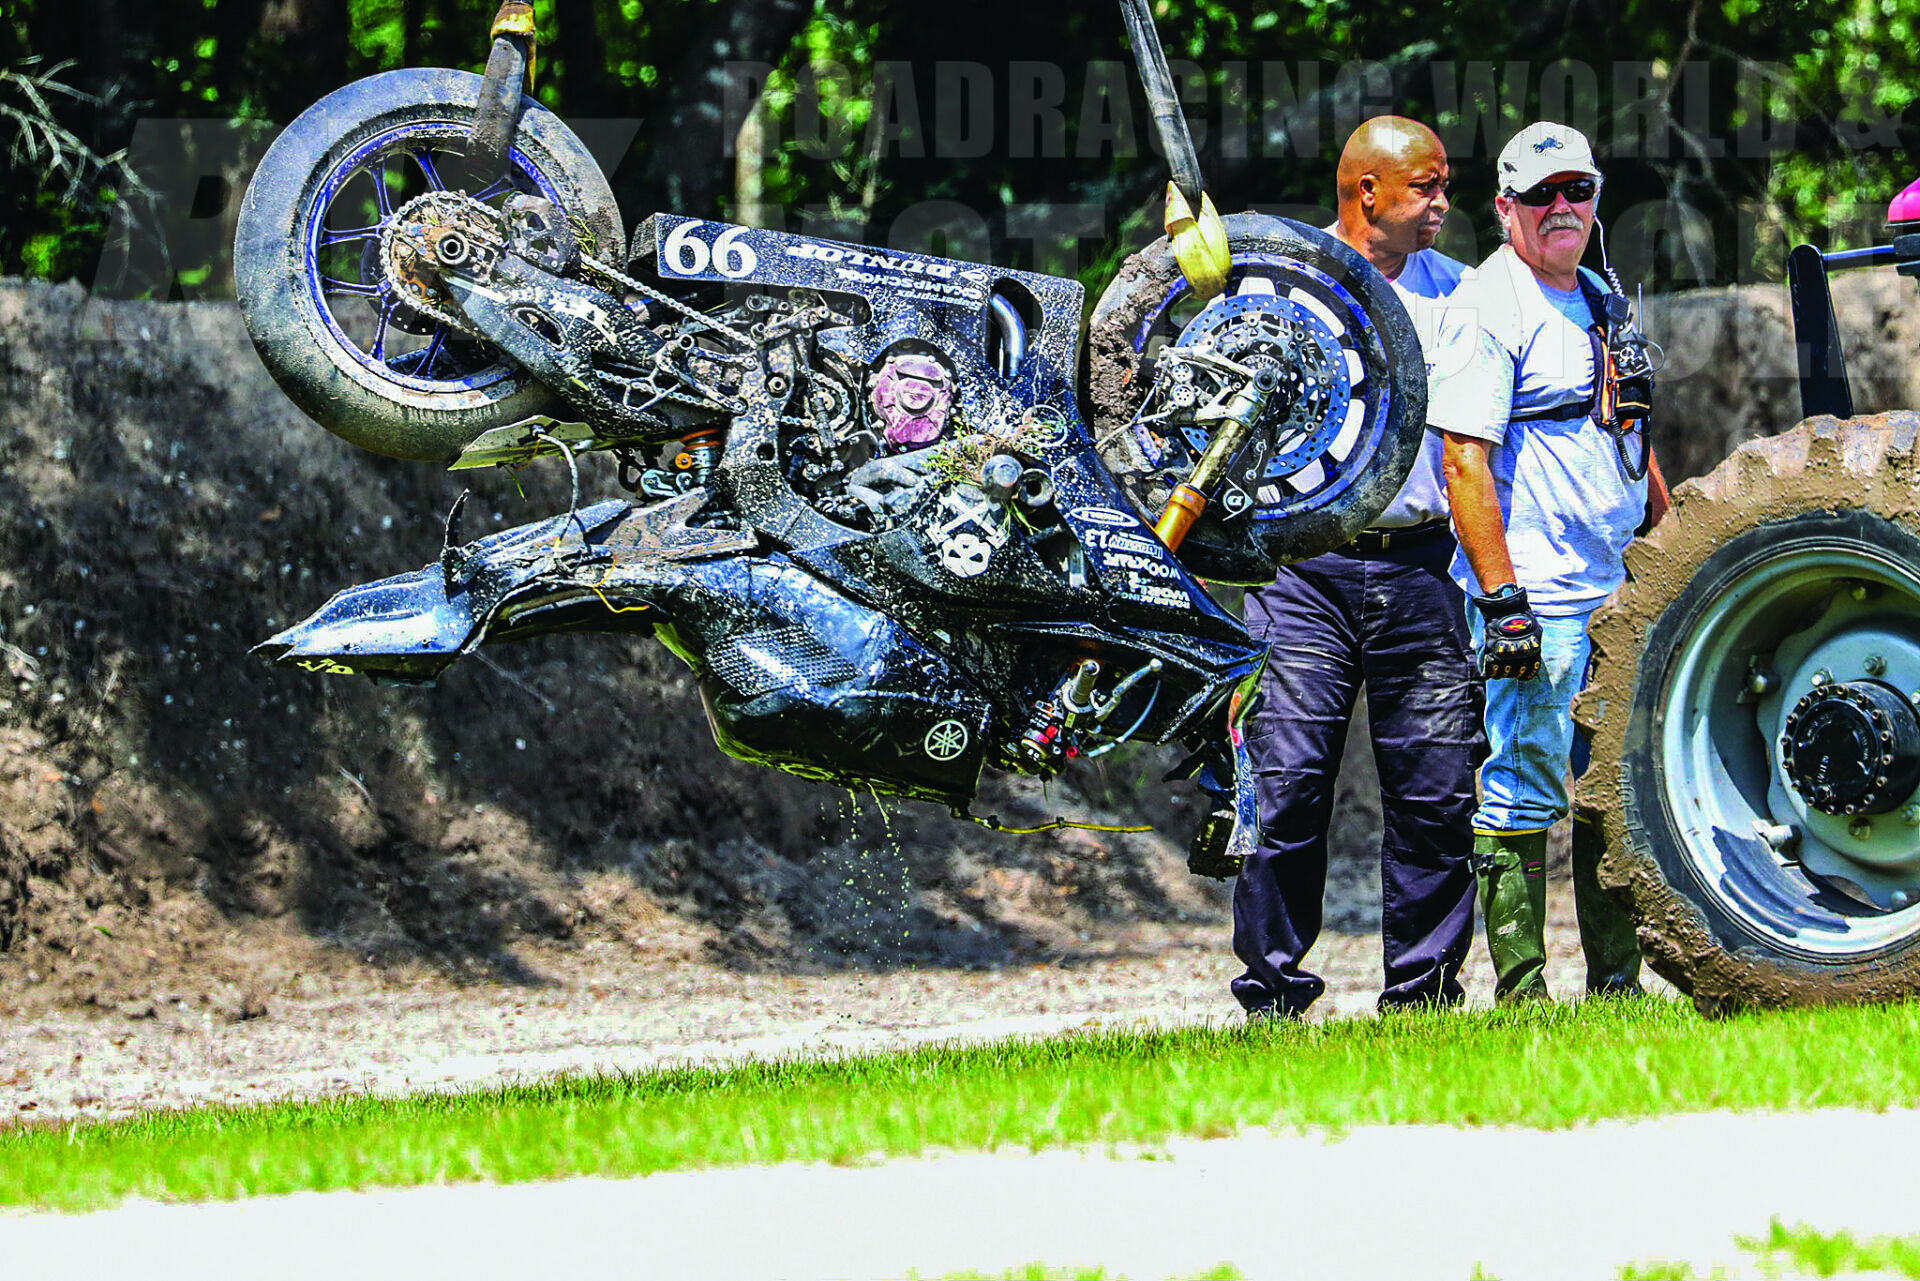 Track workers remove the AOD Yamaha after it submerged at full speed into a mud pit at Roebling Road.